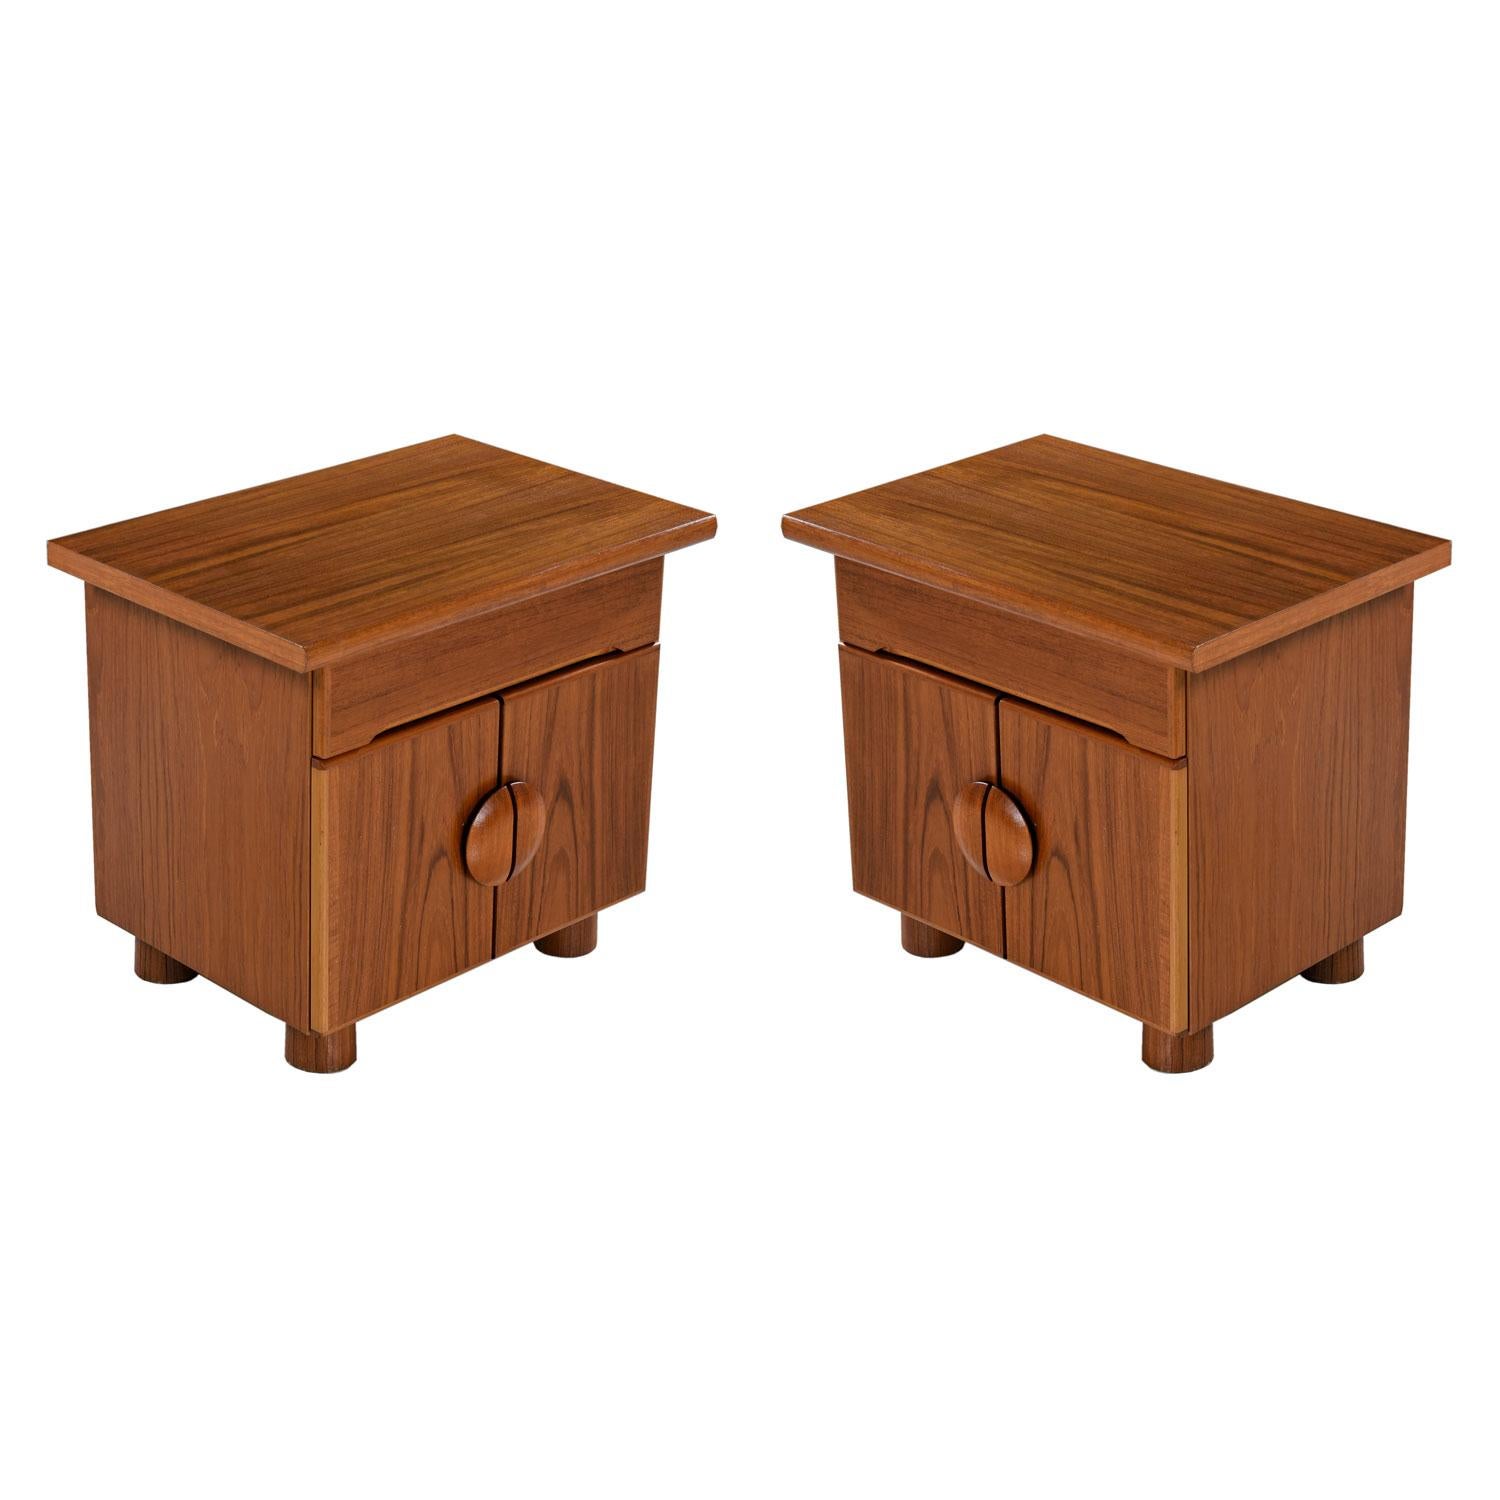 This is a very special pair of Danish teak nightstands. Produced in the latter part of the 20th century, the stout bedside tables move away from the dainty Danish modern look. The designer broadened the legs and added a graceful circular handle.